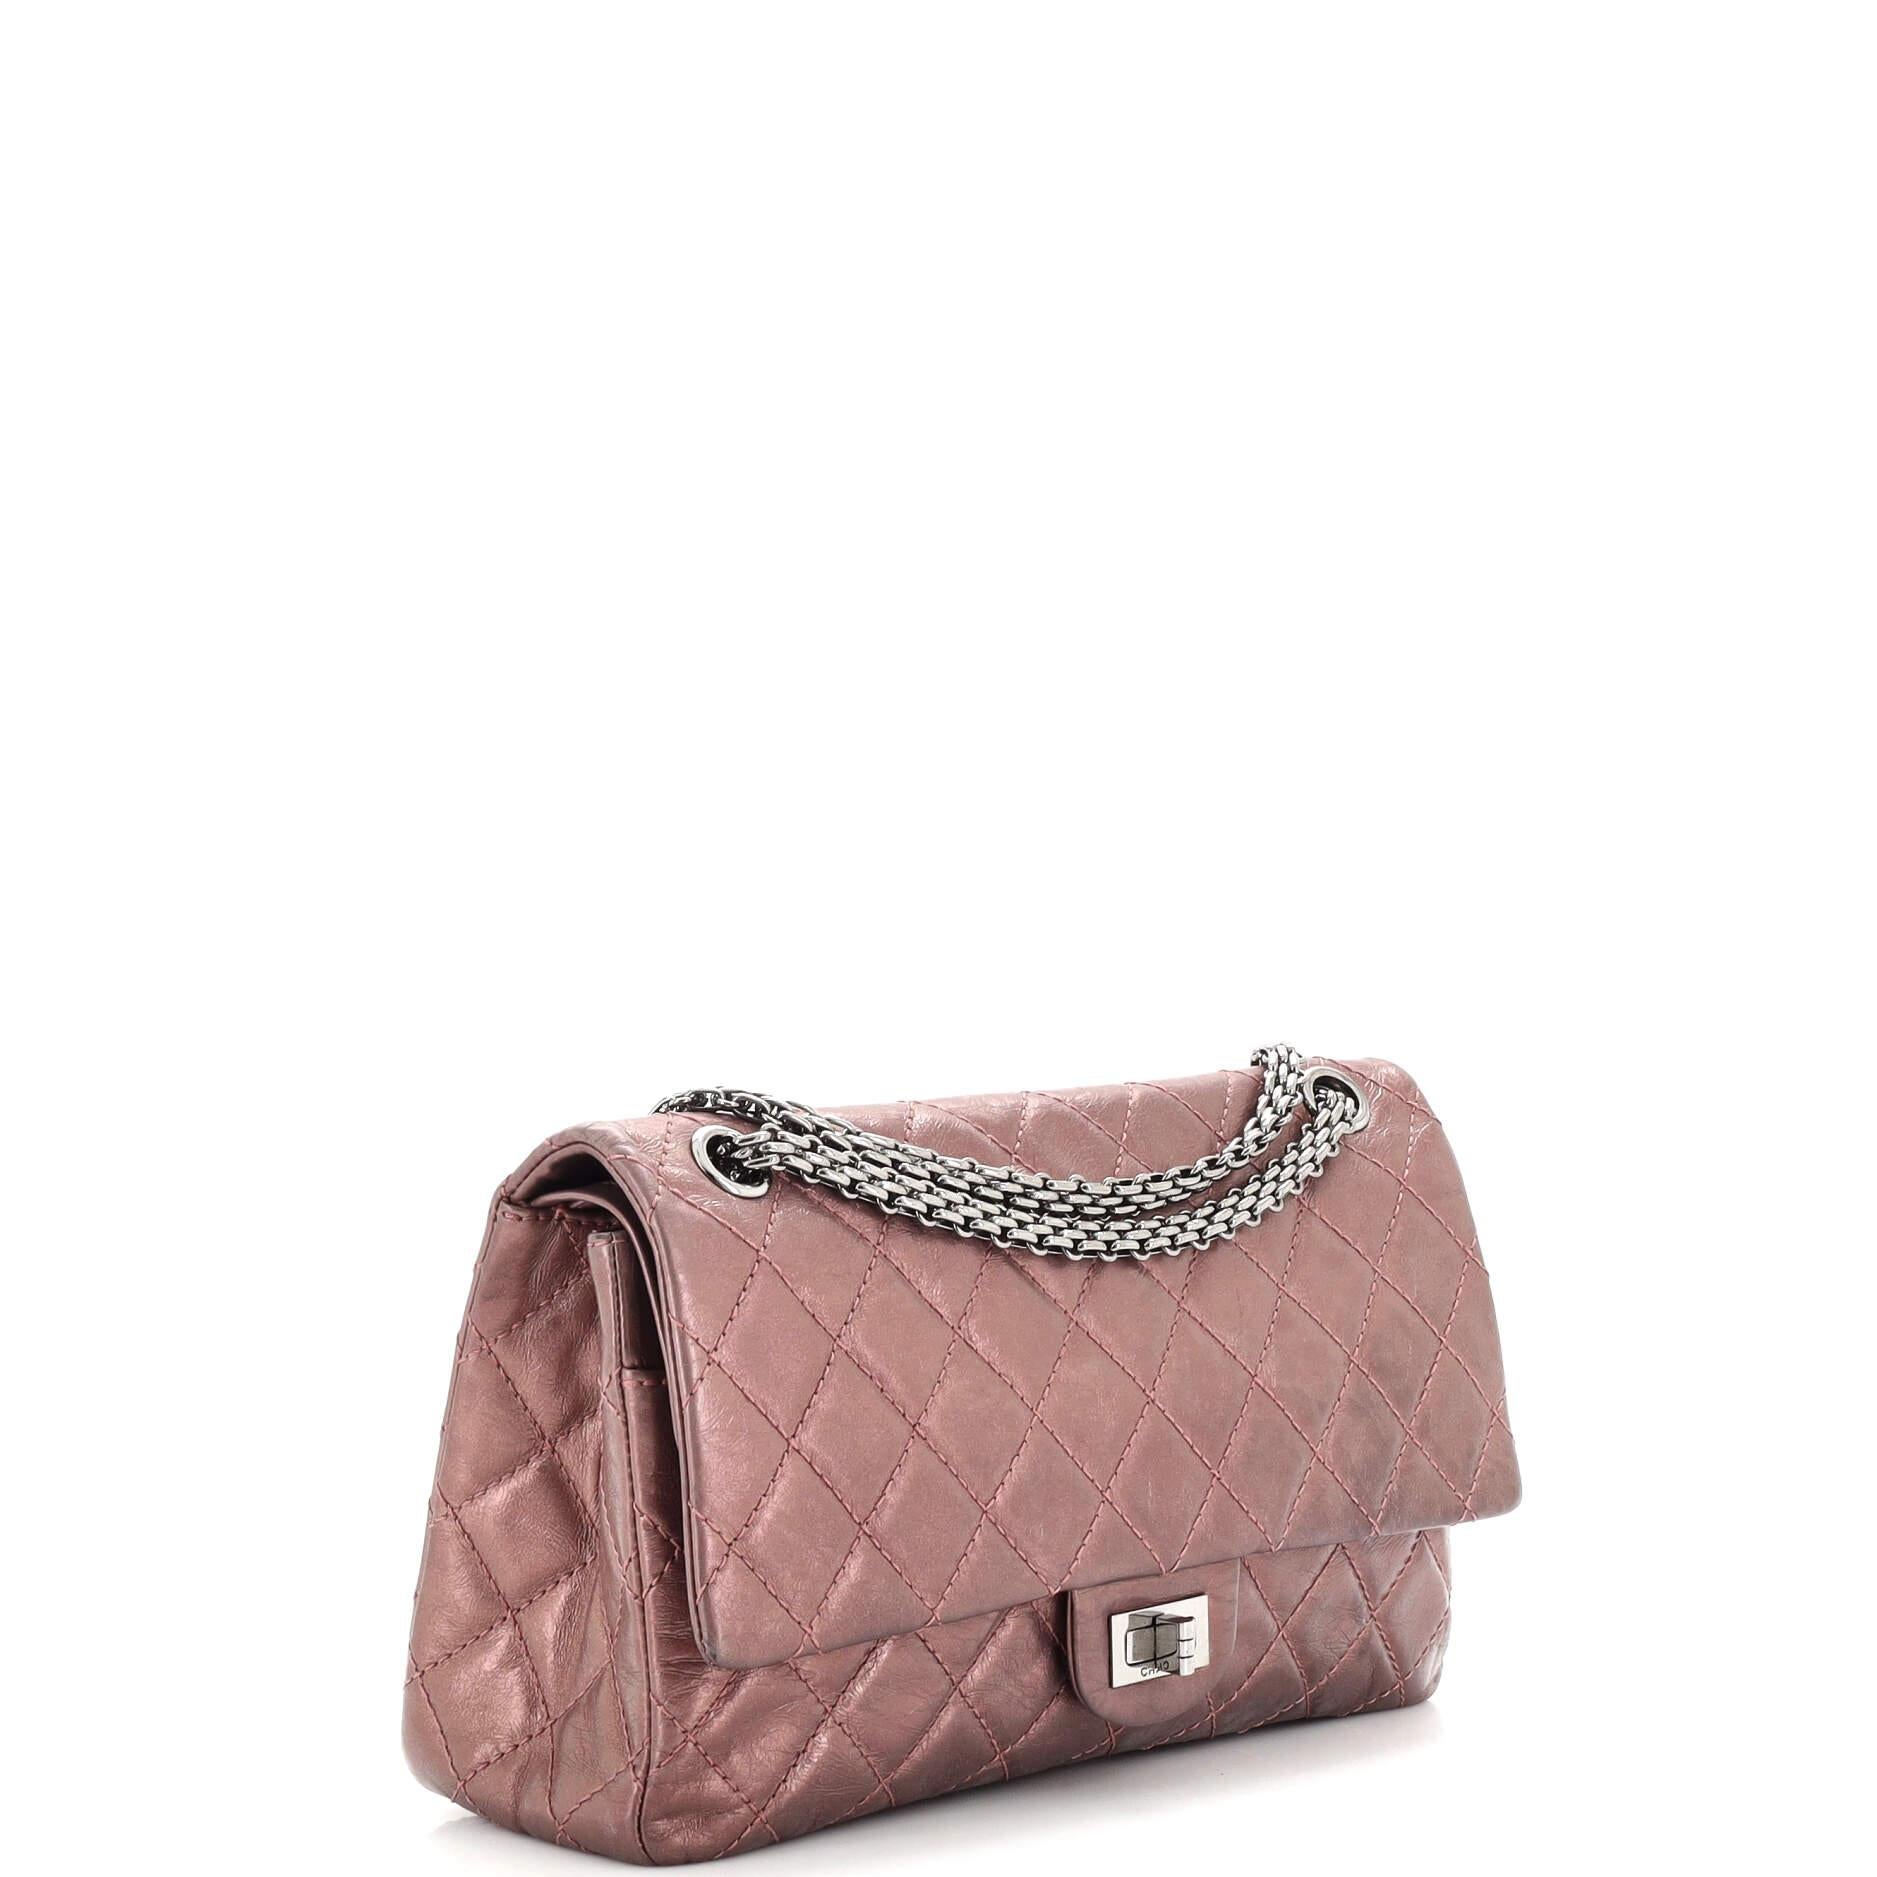 Chanel Reissue 2.55 Flap Bag Quilted Aged Calfskin 226 In Good Condition For Sale In NY, NY